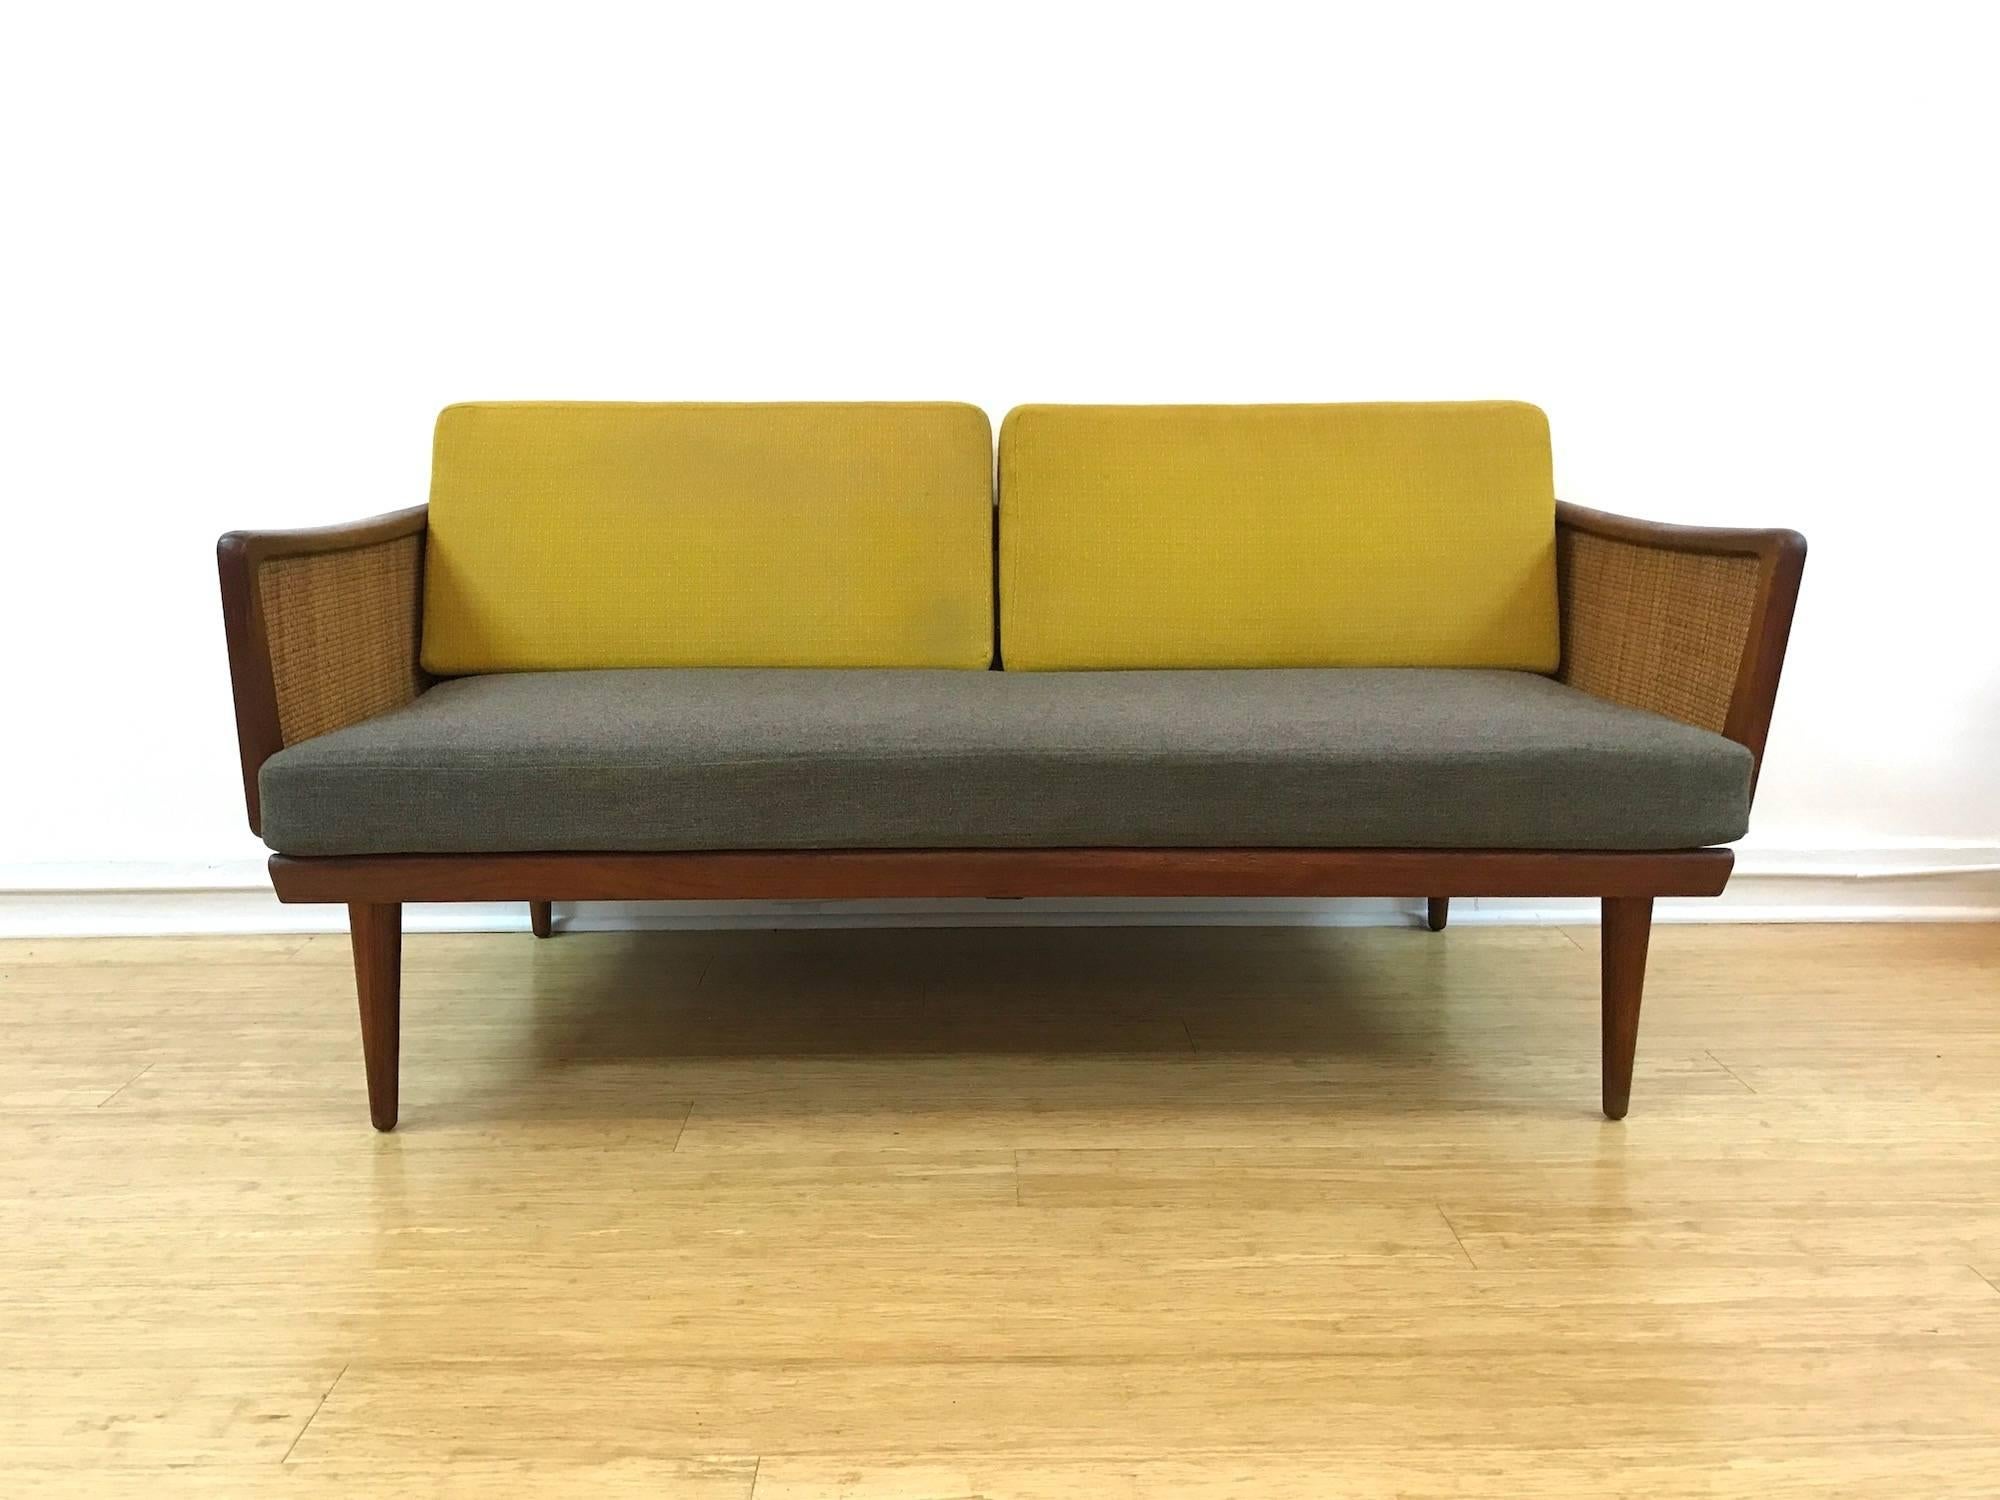 Minerva Danish Modern loveseat daybed designed by Peter Hvidt & Orla Mølgaard-Nielsen in teak and cane for France & Sons, Denmark, c. 1960, retailed by John Stuart. 
Shaped arms over caned sides that fold down, original back and seat cushions and